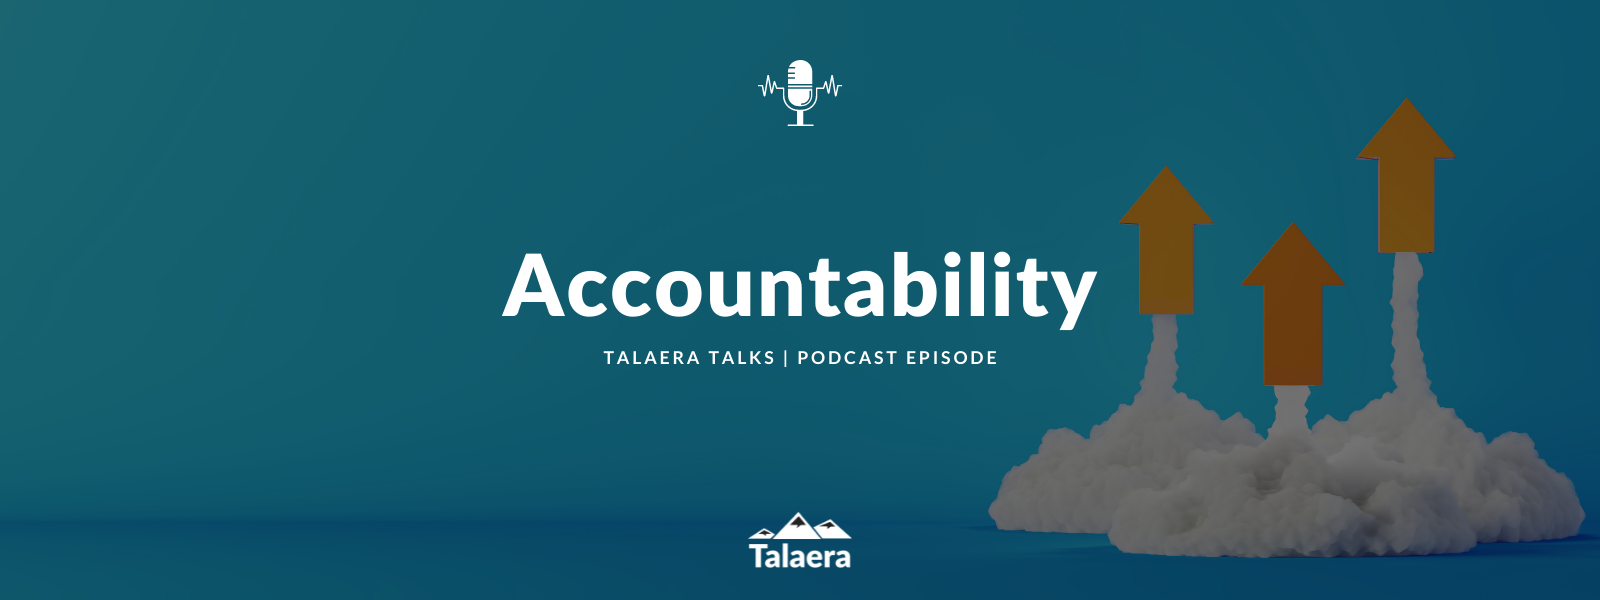 Accountability in the Workplace - Talaera Business English